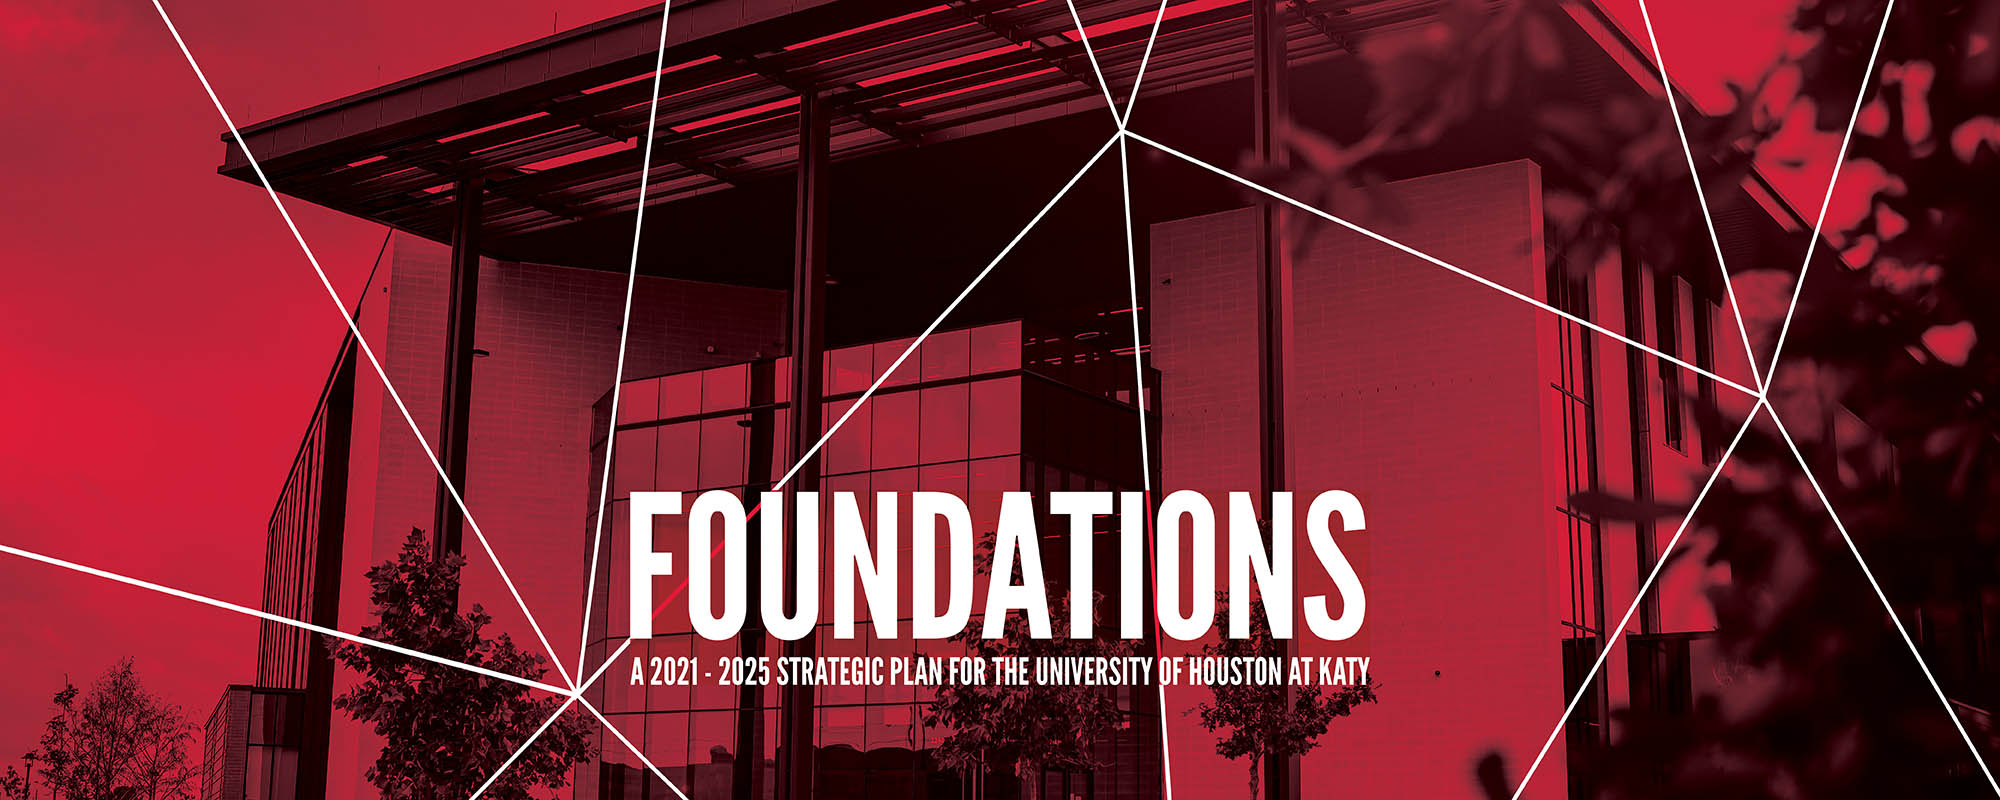 Foundations: a 2021-2025 strategic plan for the University of Houston at Katy